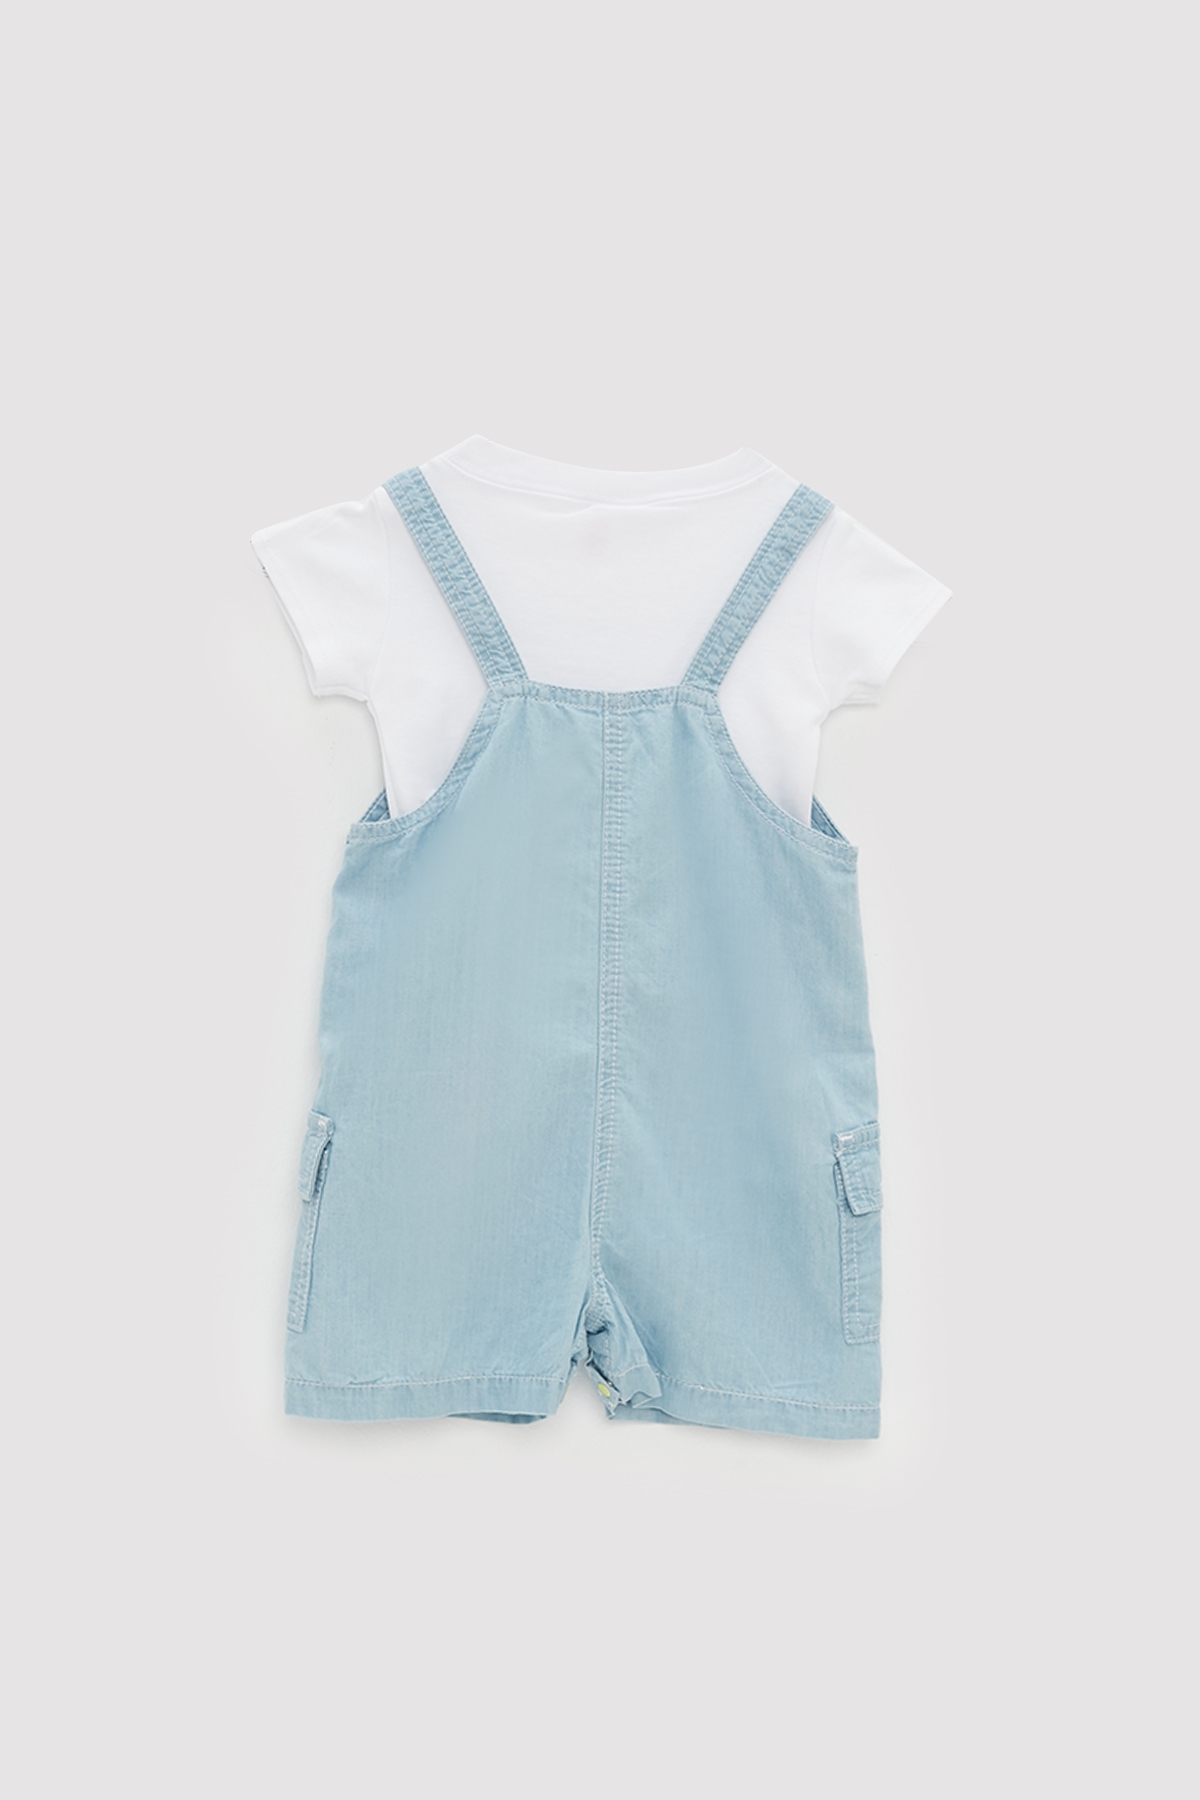 discount 87% NoName baby-romper Blue 12-18M KIDS FASHION Baby Jumpsuits & Dungarees Jean 